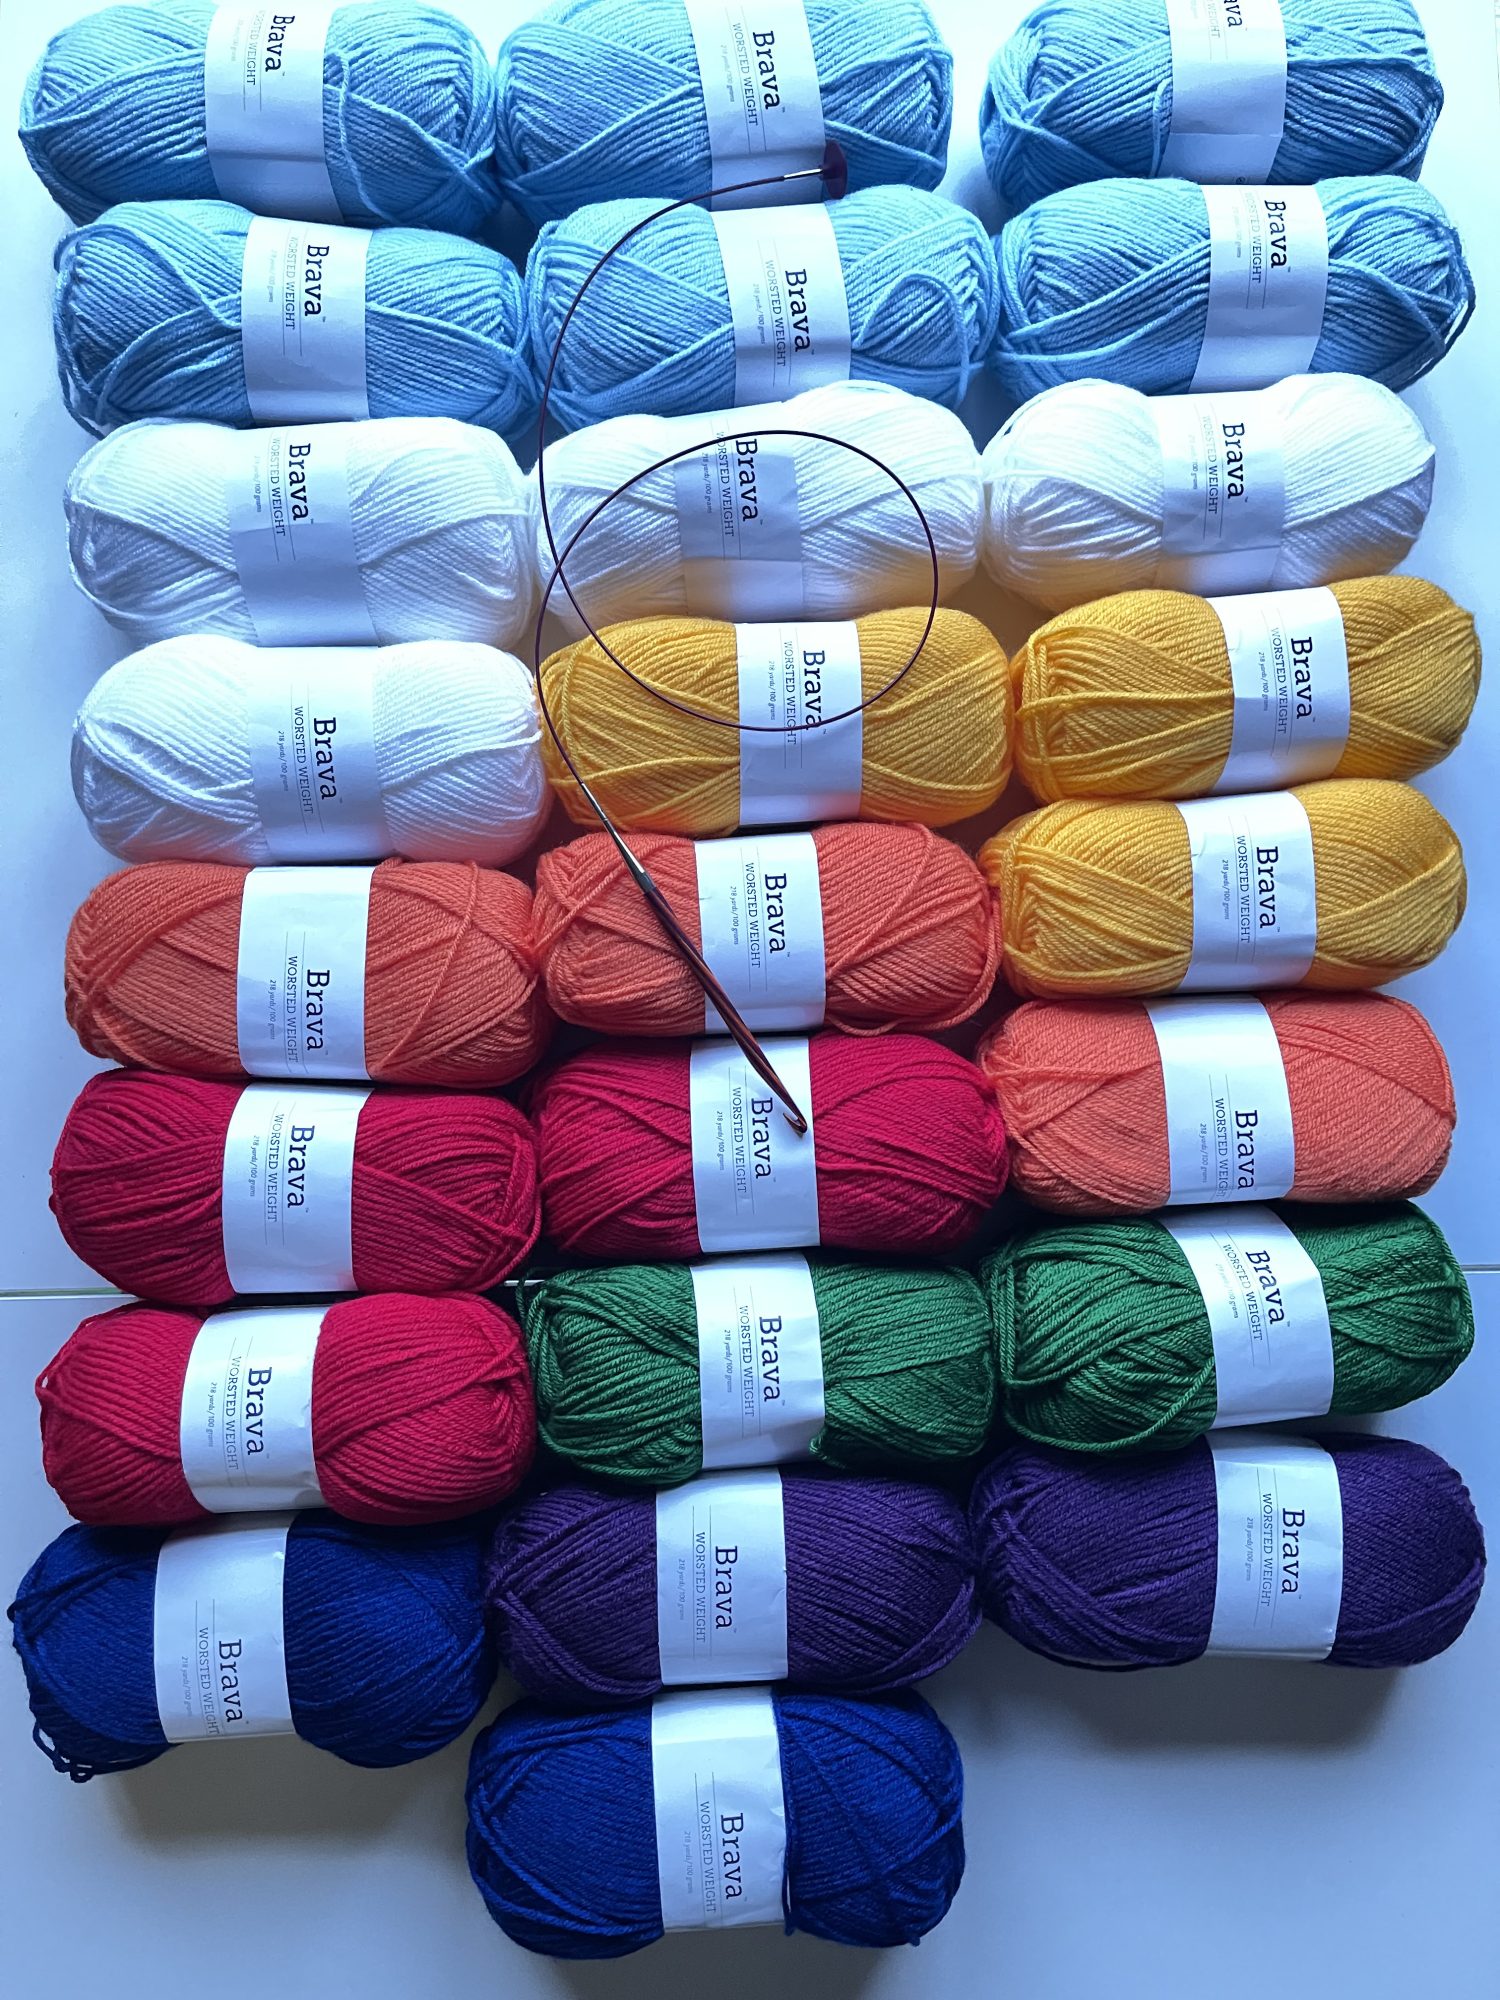 An image of yarn that is grouped by color for a tunisian blanket. Starting at the top, there are 6 skeins of sky blue yarn, 4 skeins of white yarn, 3 skeins each of yellow, orange and red, and 2 skeins each of green, purple and blue. There is a multicolored tunisian crochet hook with an attached cable laying on top of the yarn for the tunisian blanket.